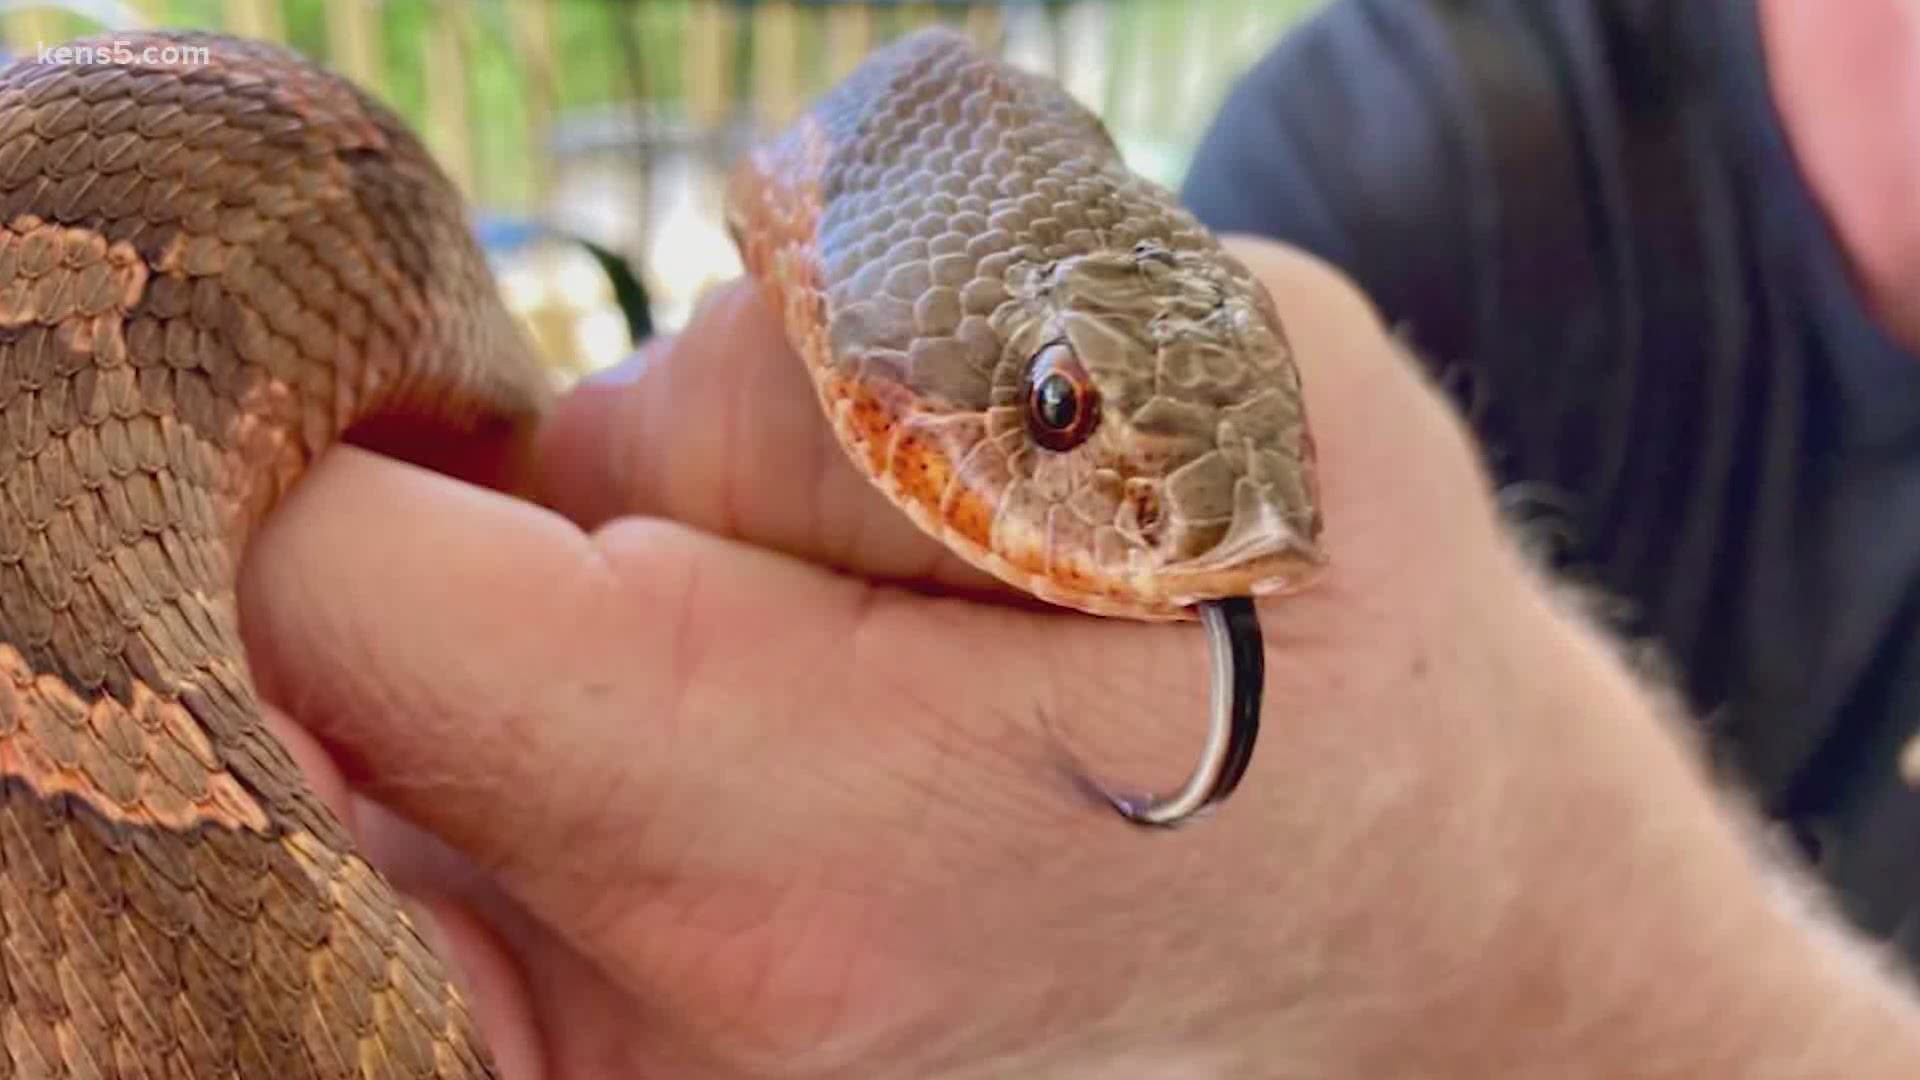 Video of a venomous snake caught in New Braunfels this week is getting a lot of attention. Hill Country Snake Removal gets multiple calls per week about sightings.